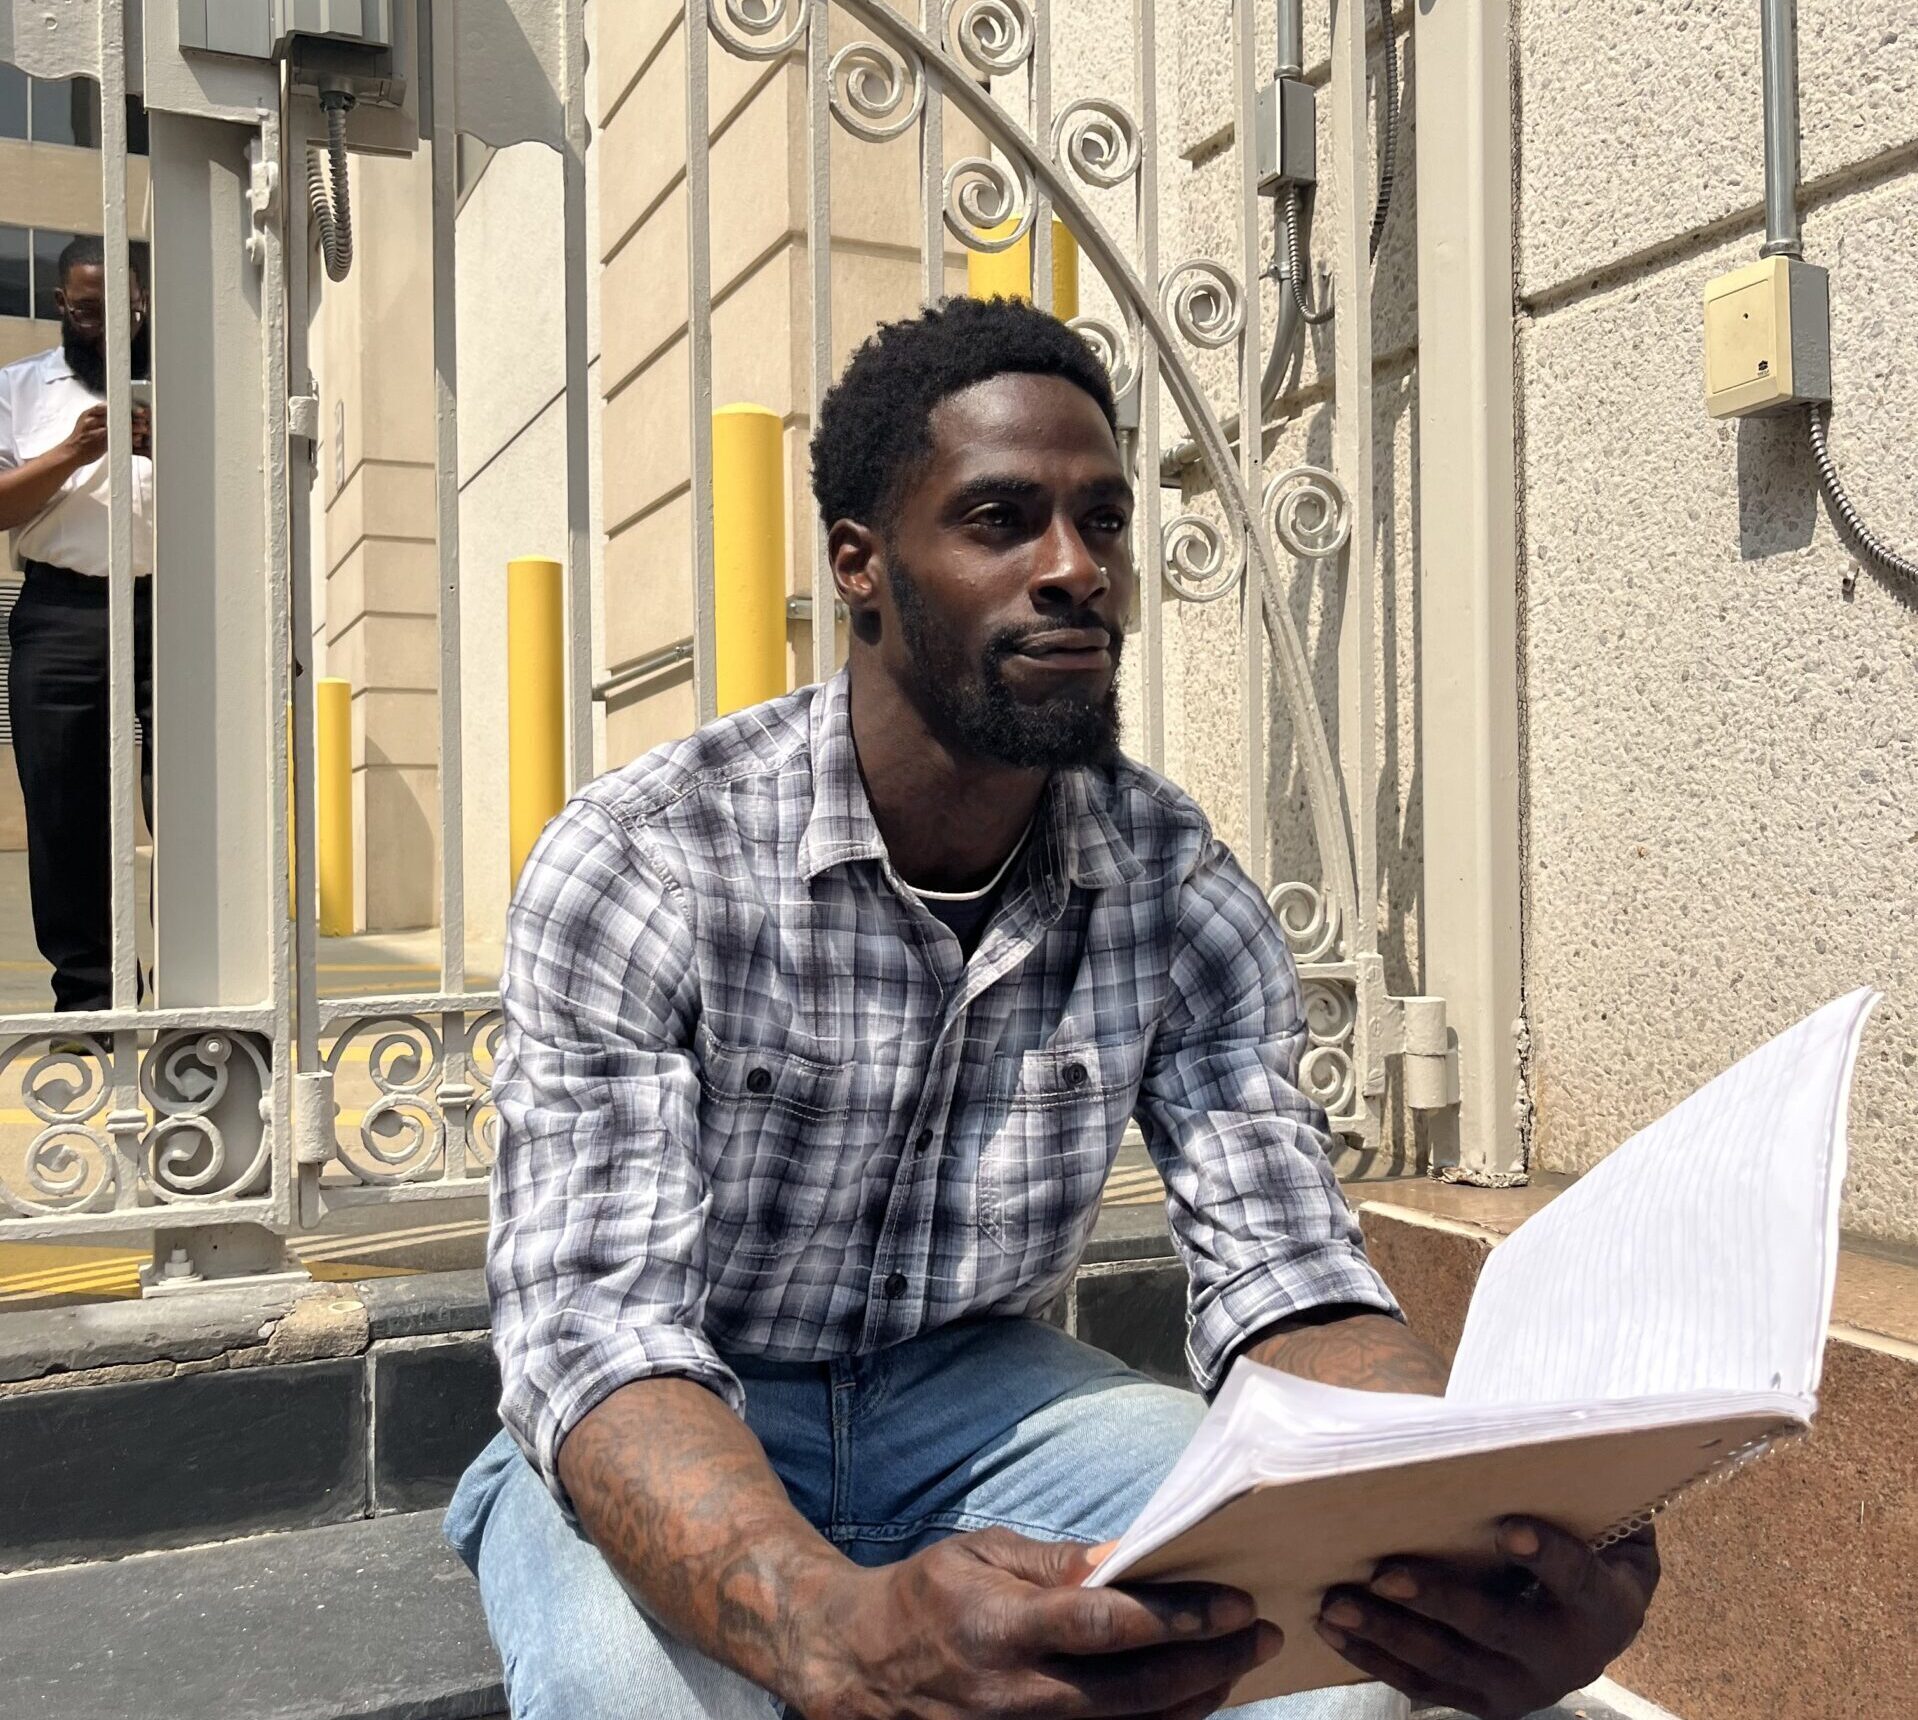 A Black man in a plaid shirt and light wash jeans sits on a step and reads from his notebook.